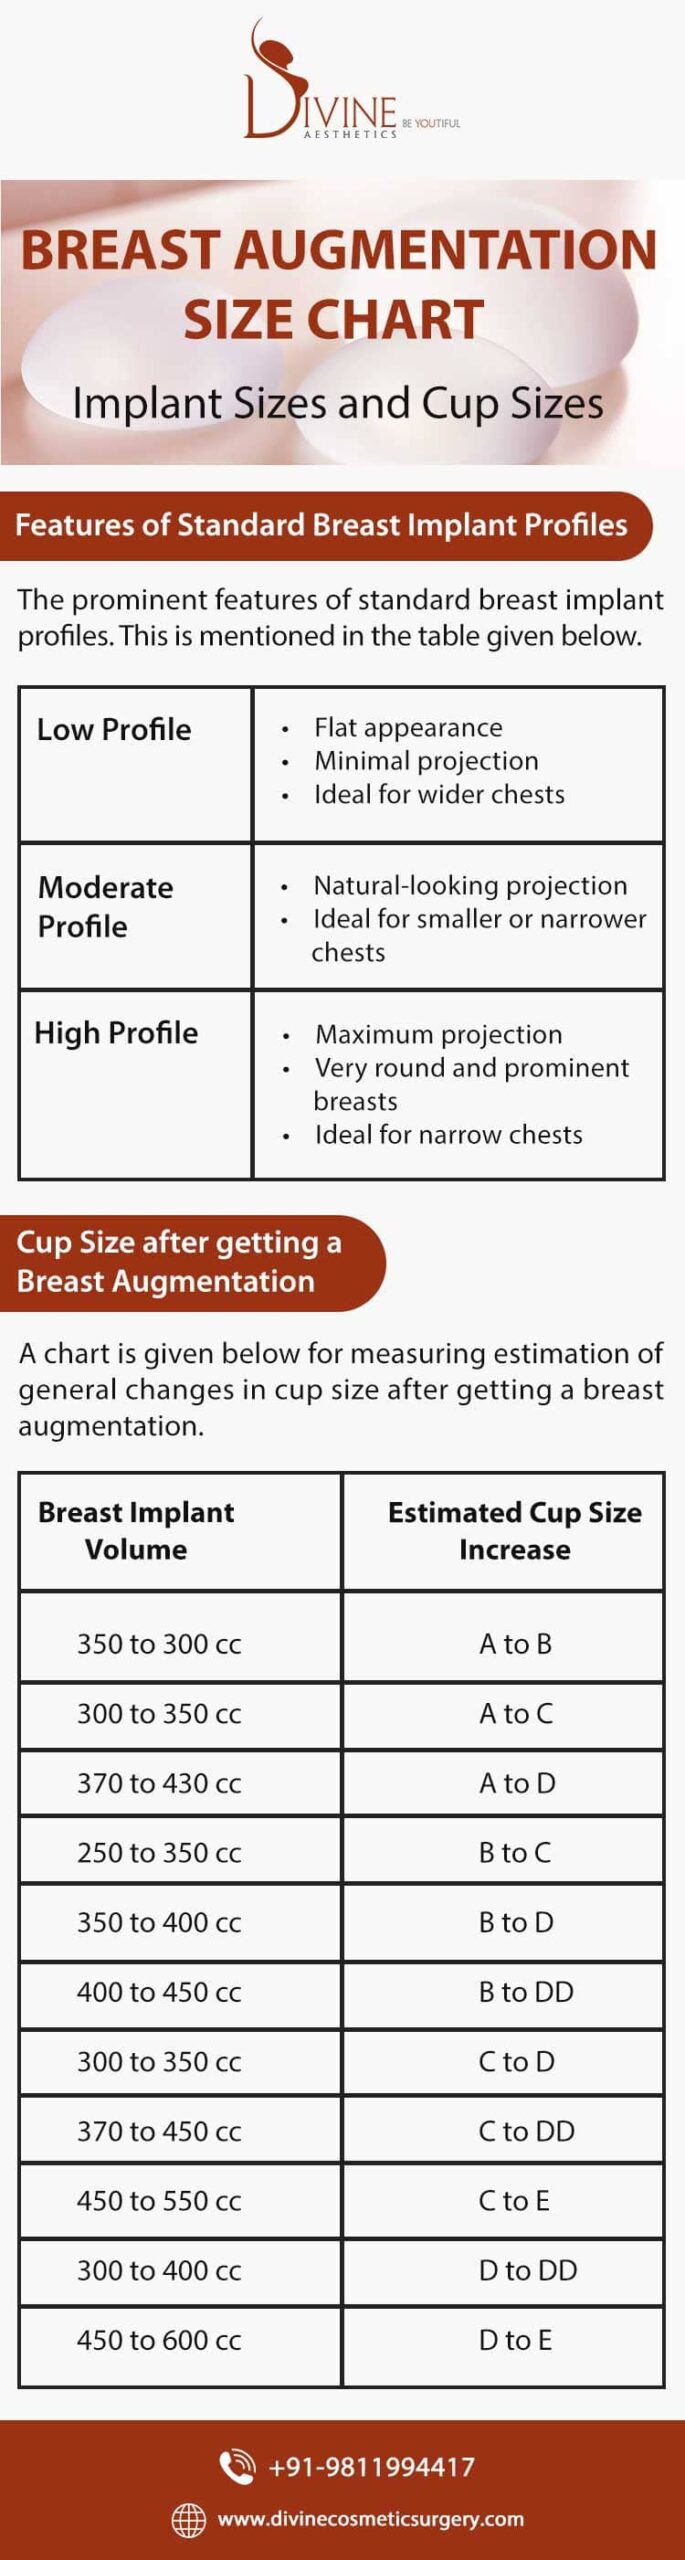 Guide To Breast Implant Sizes & Tips For Choosing The Right One